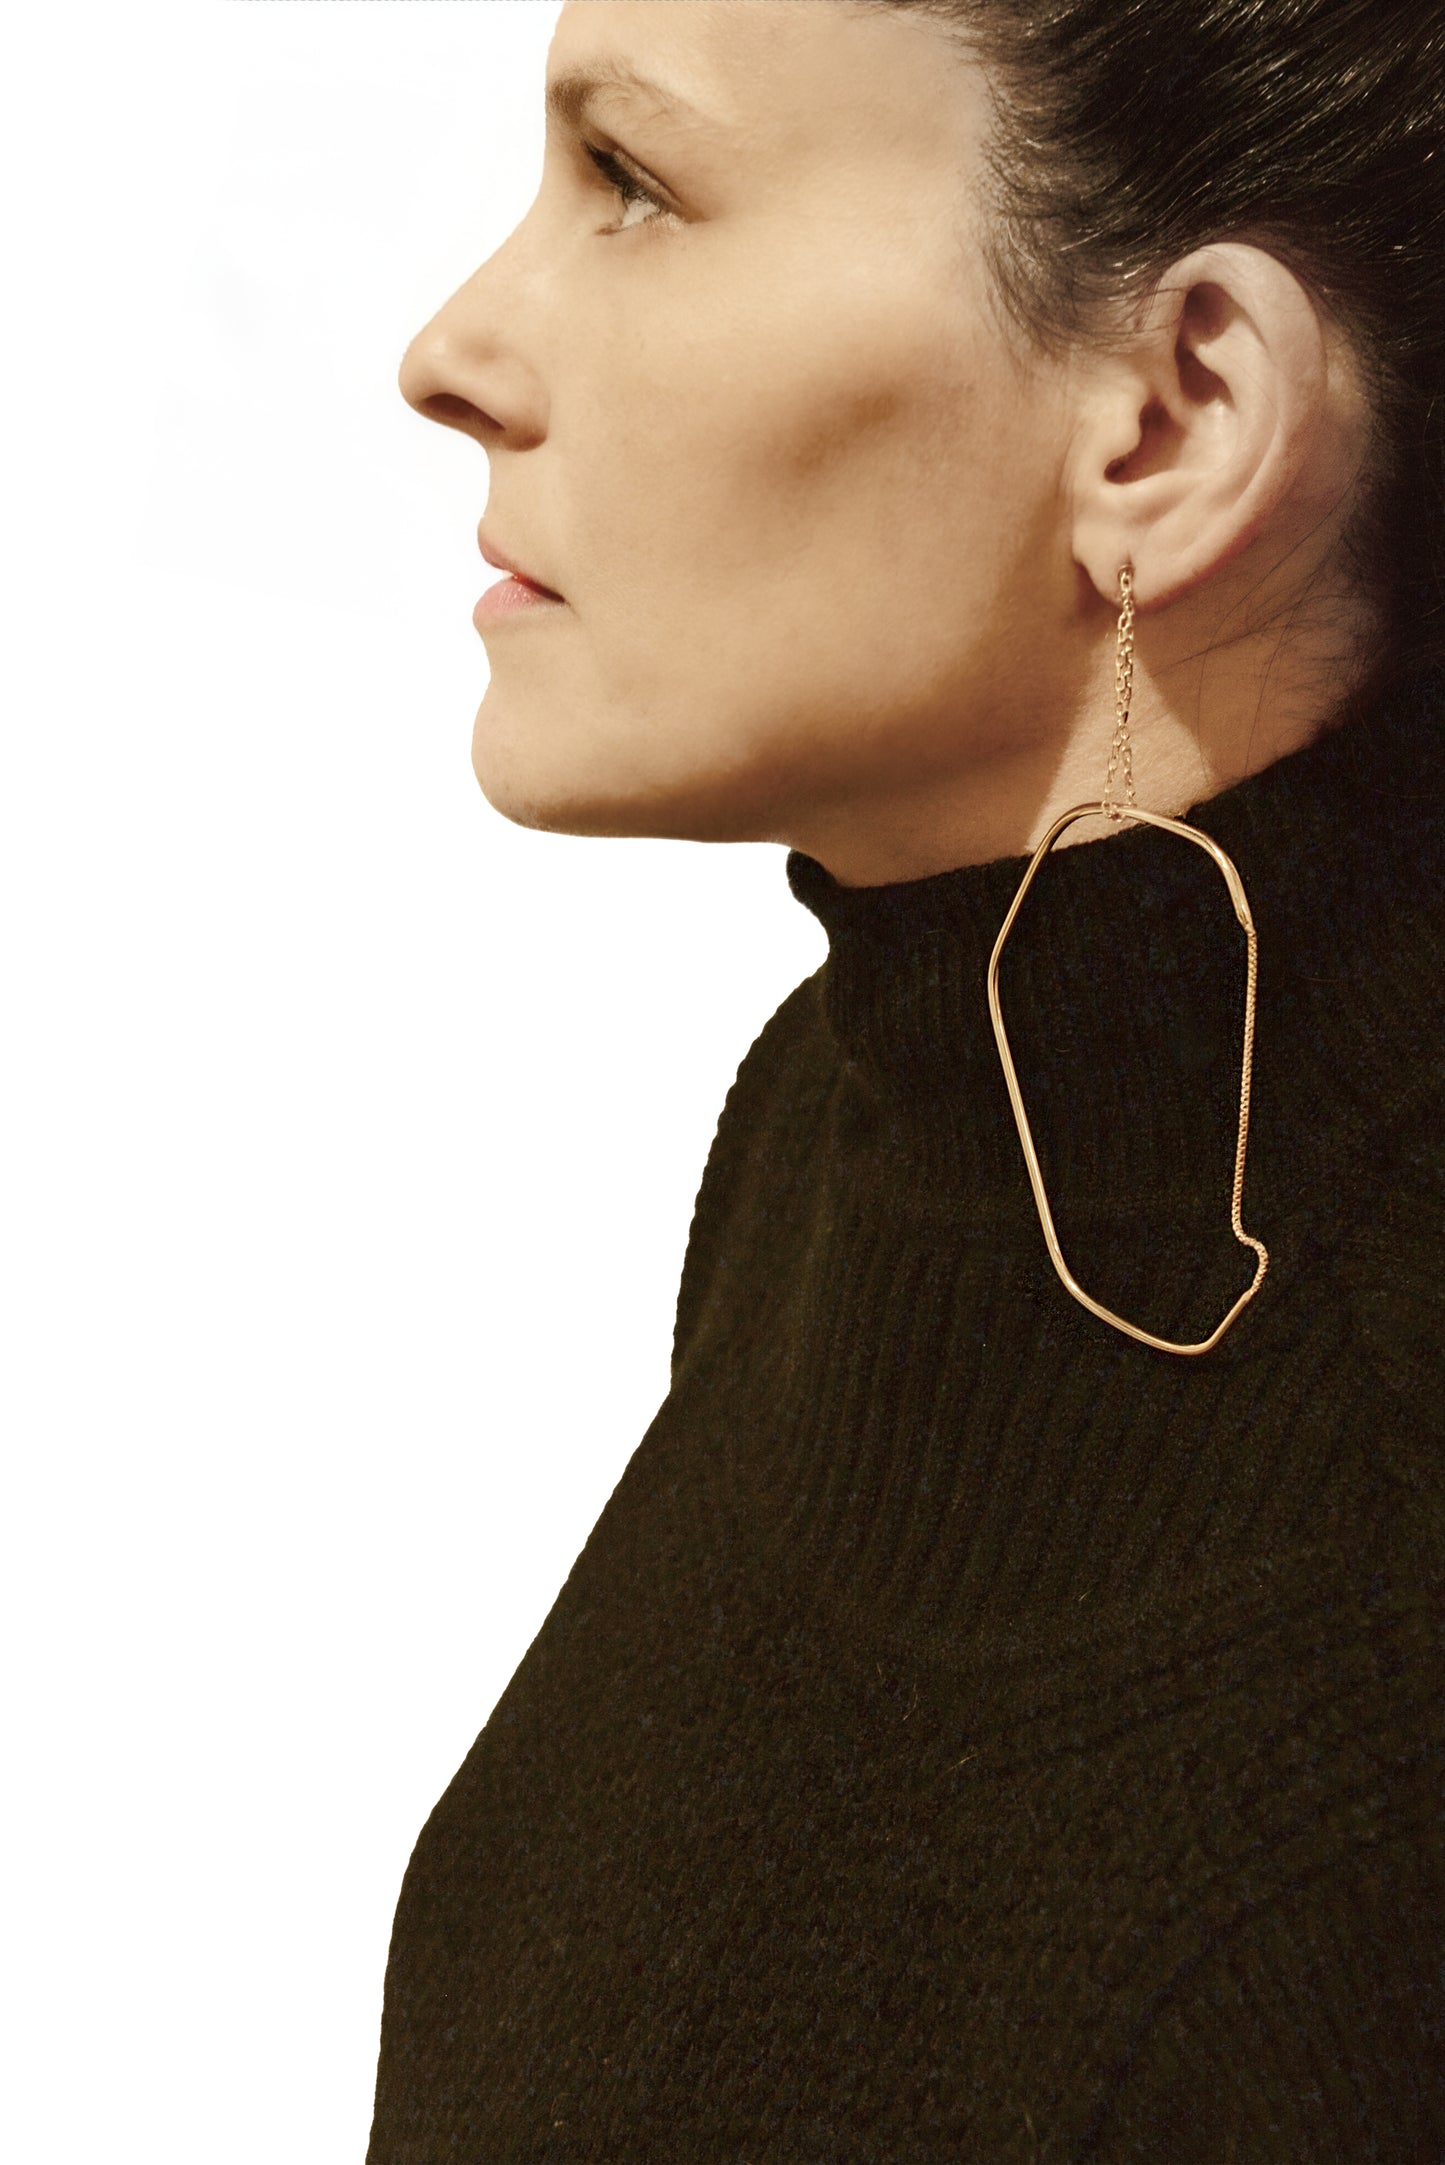 a woman wearing a black sweater and gold hoop earrings